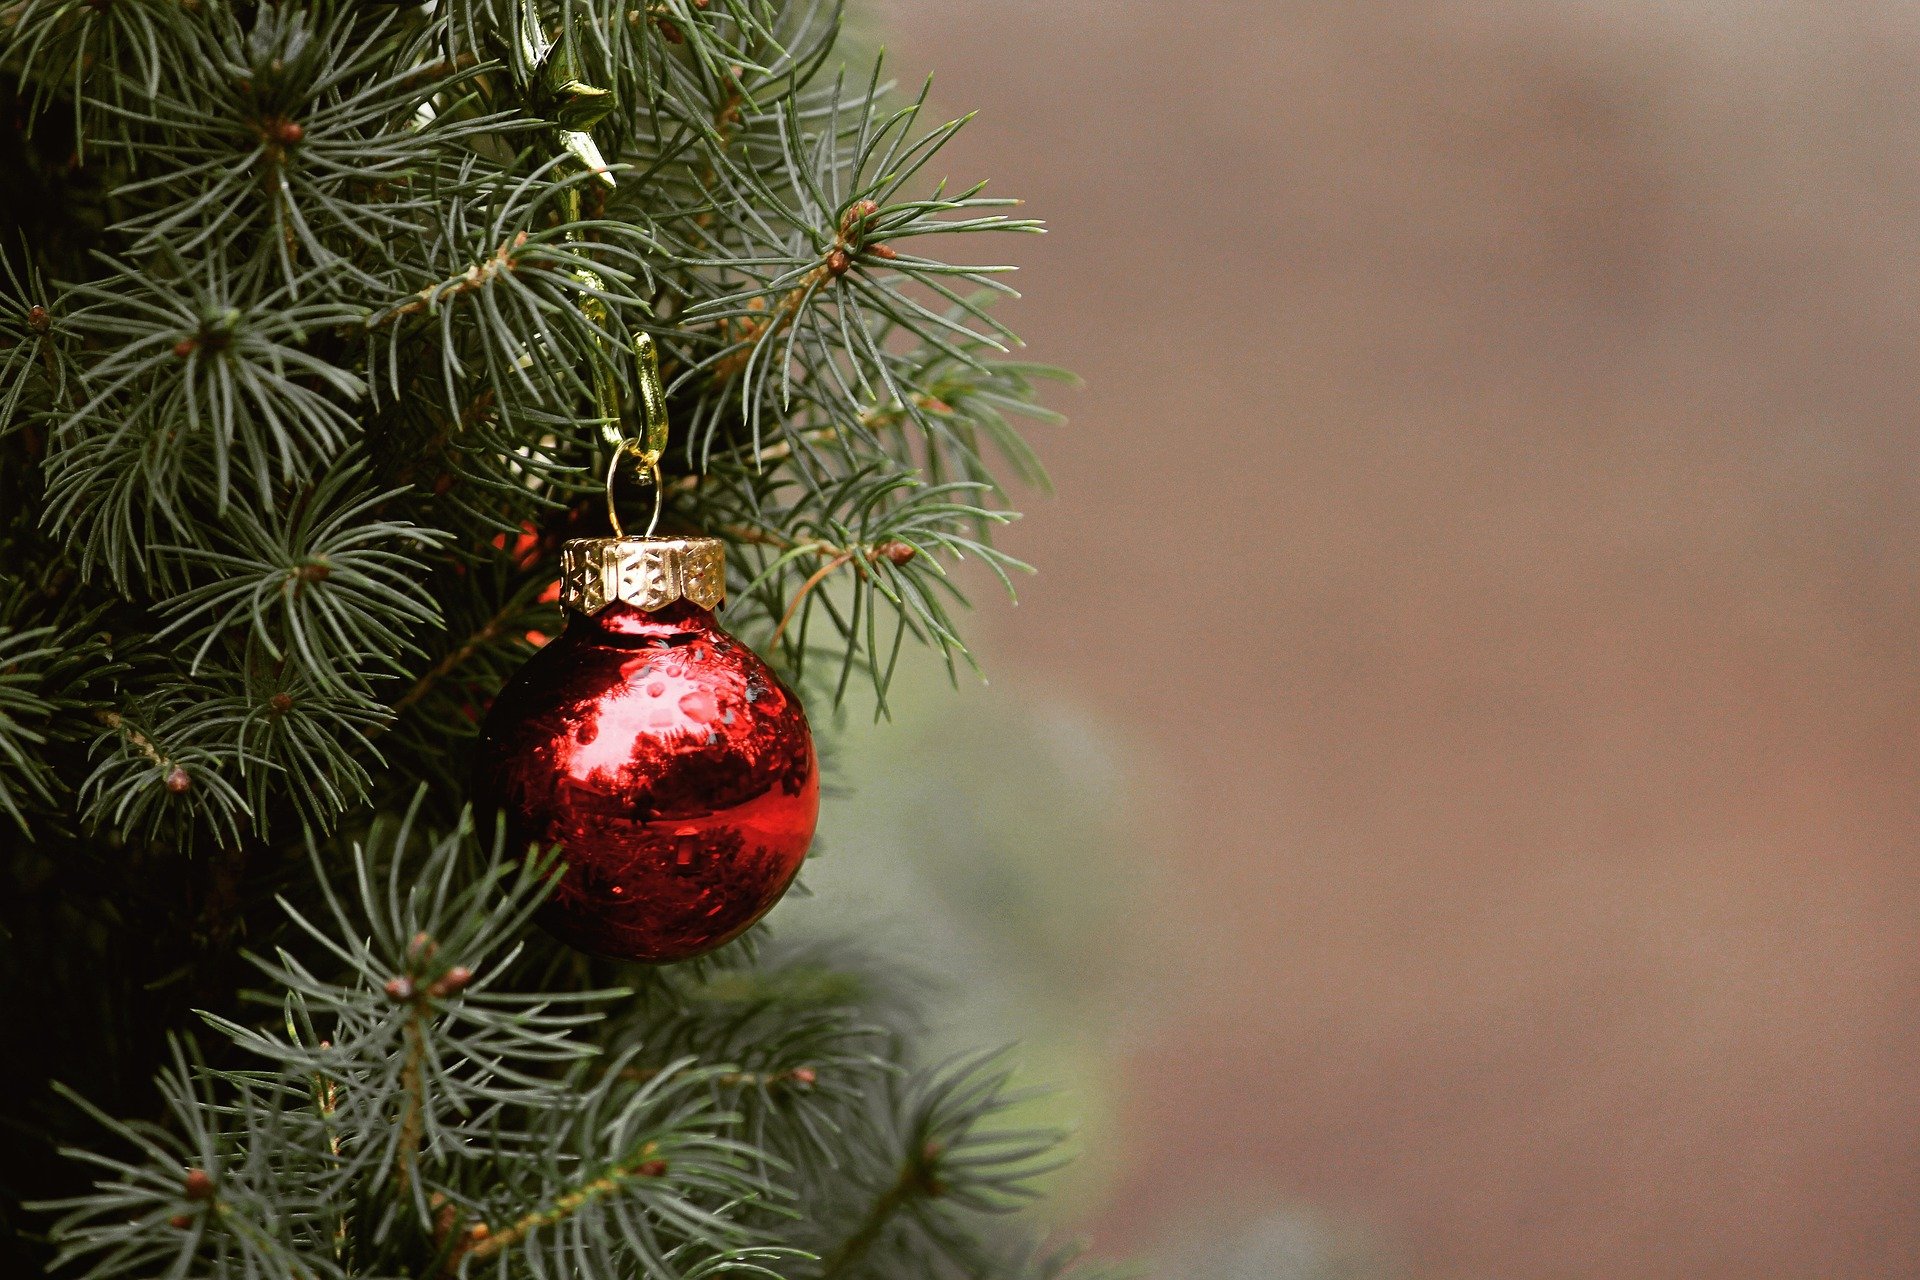 a single red glass ornament hangs on a green Christmas tree